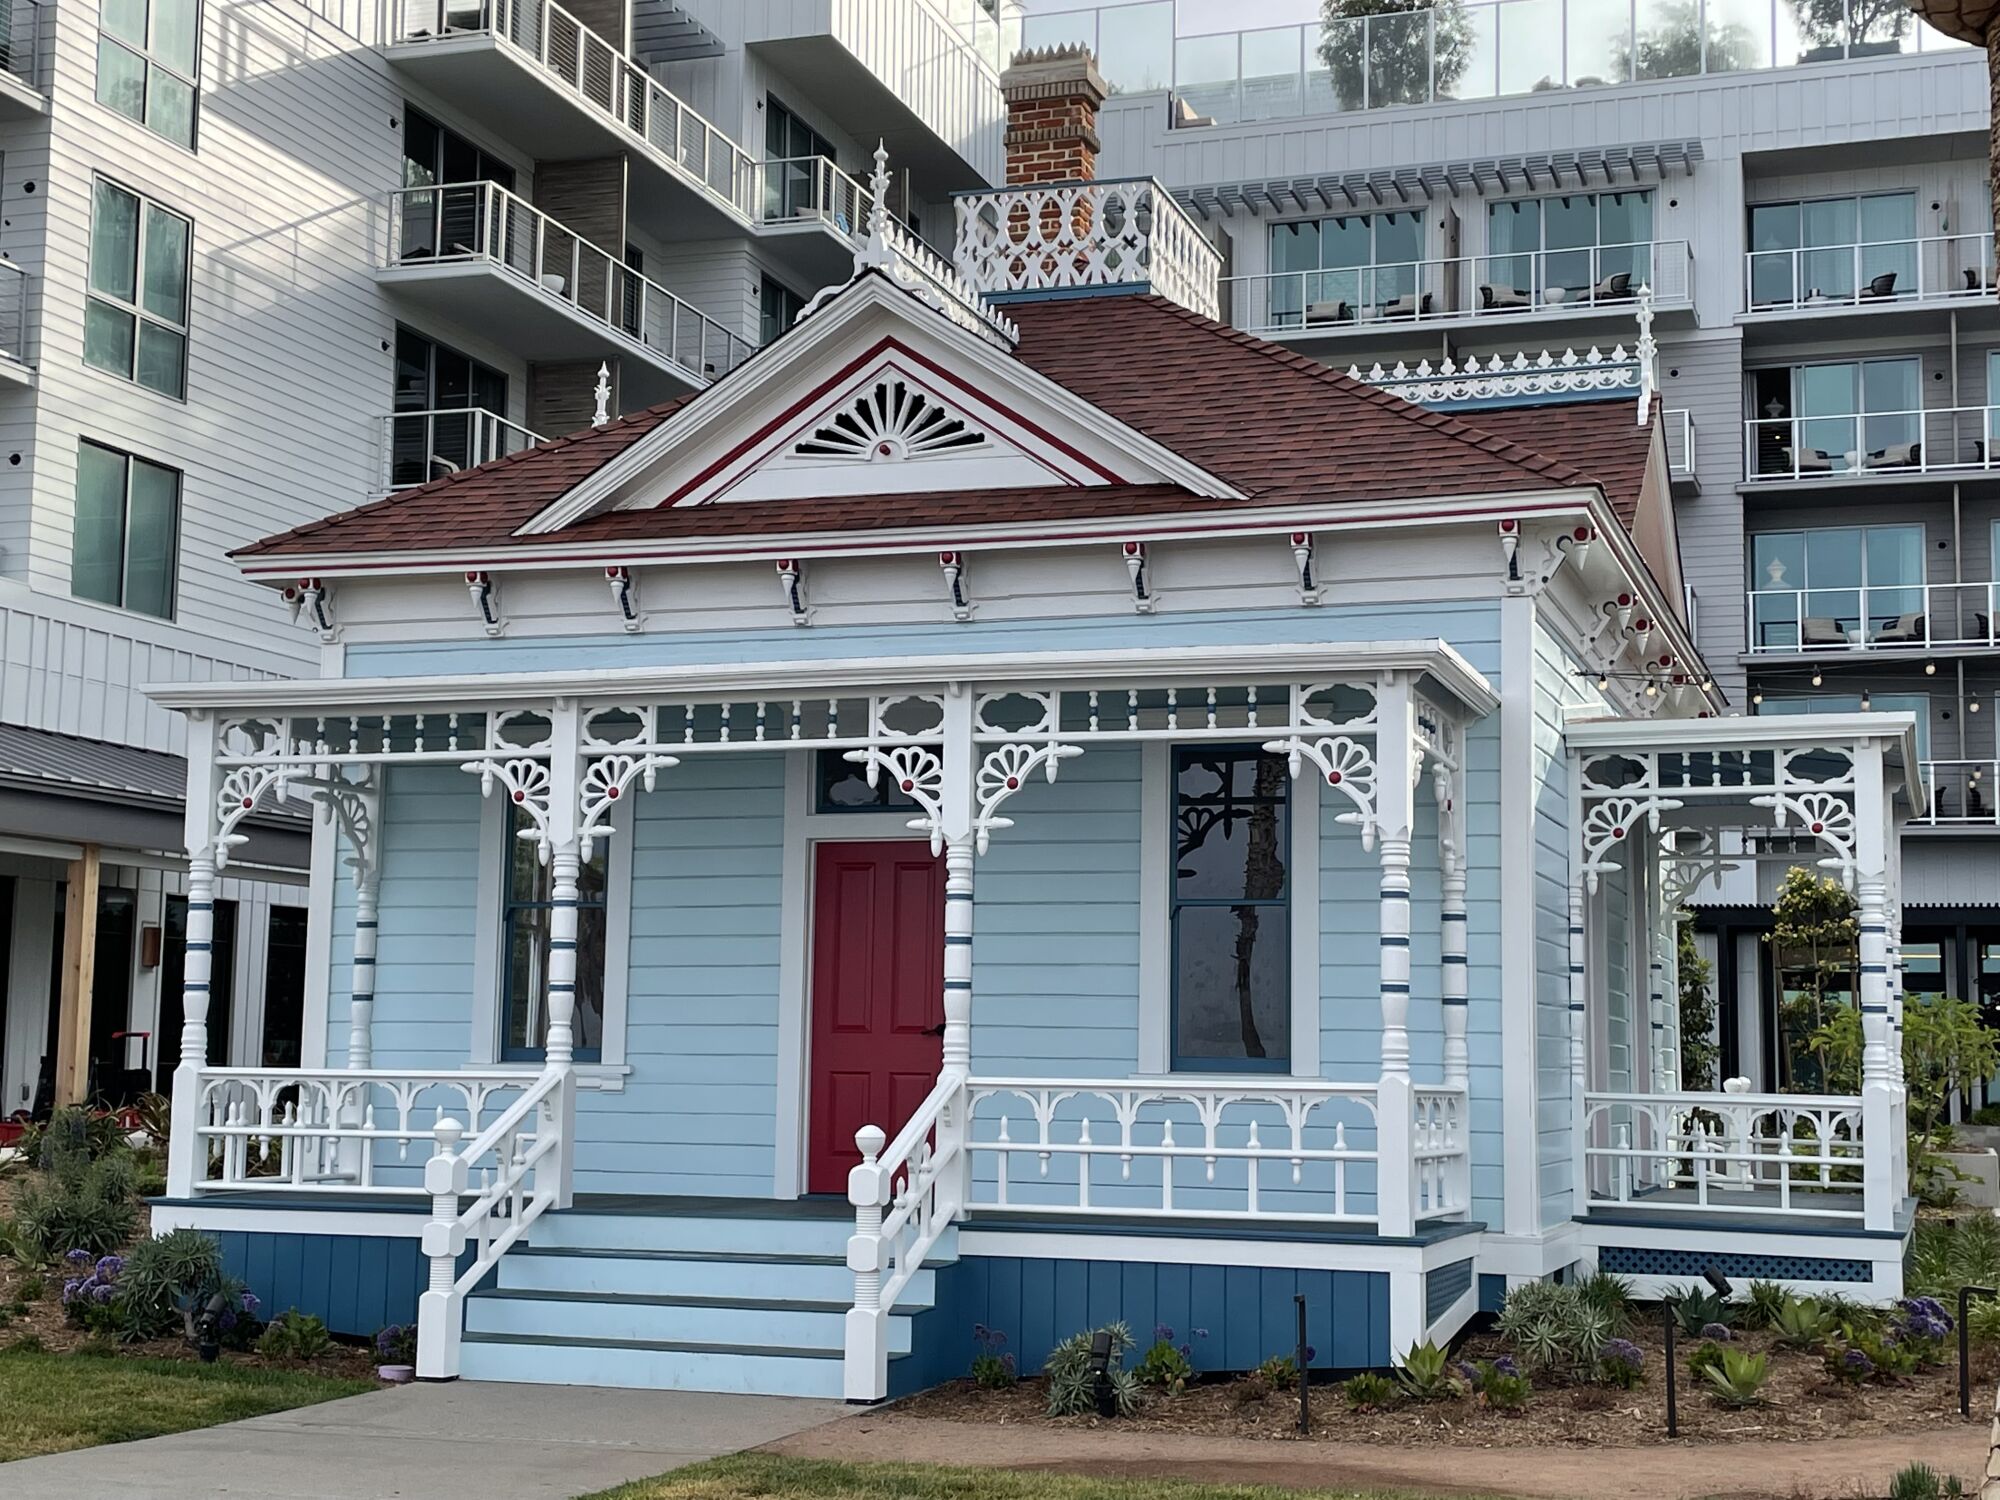 2021 Orchids & Onions: Historic Preservation - Orchid winner Top Gun/Graves House Restoration